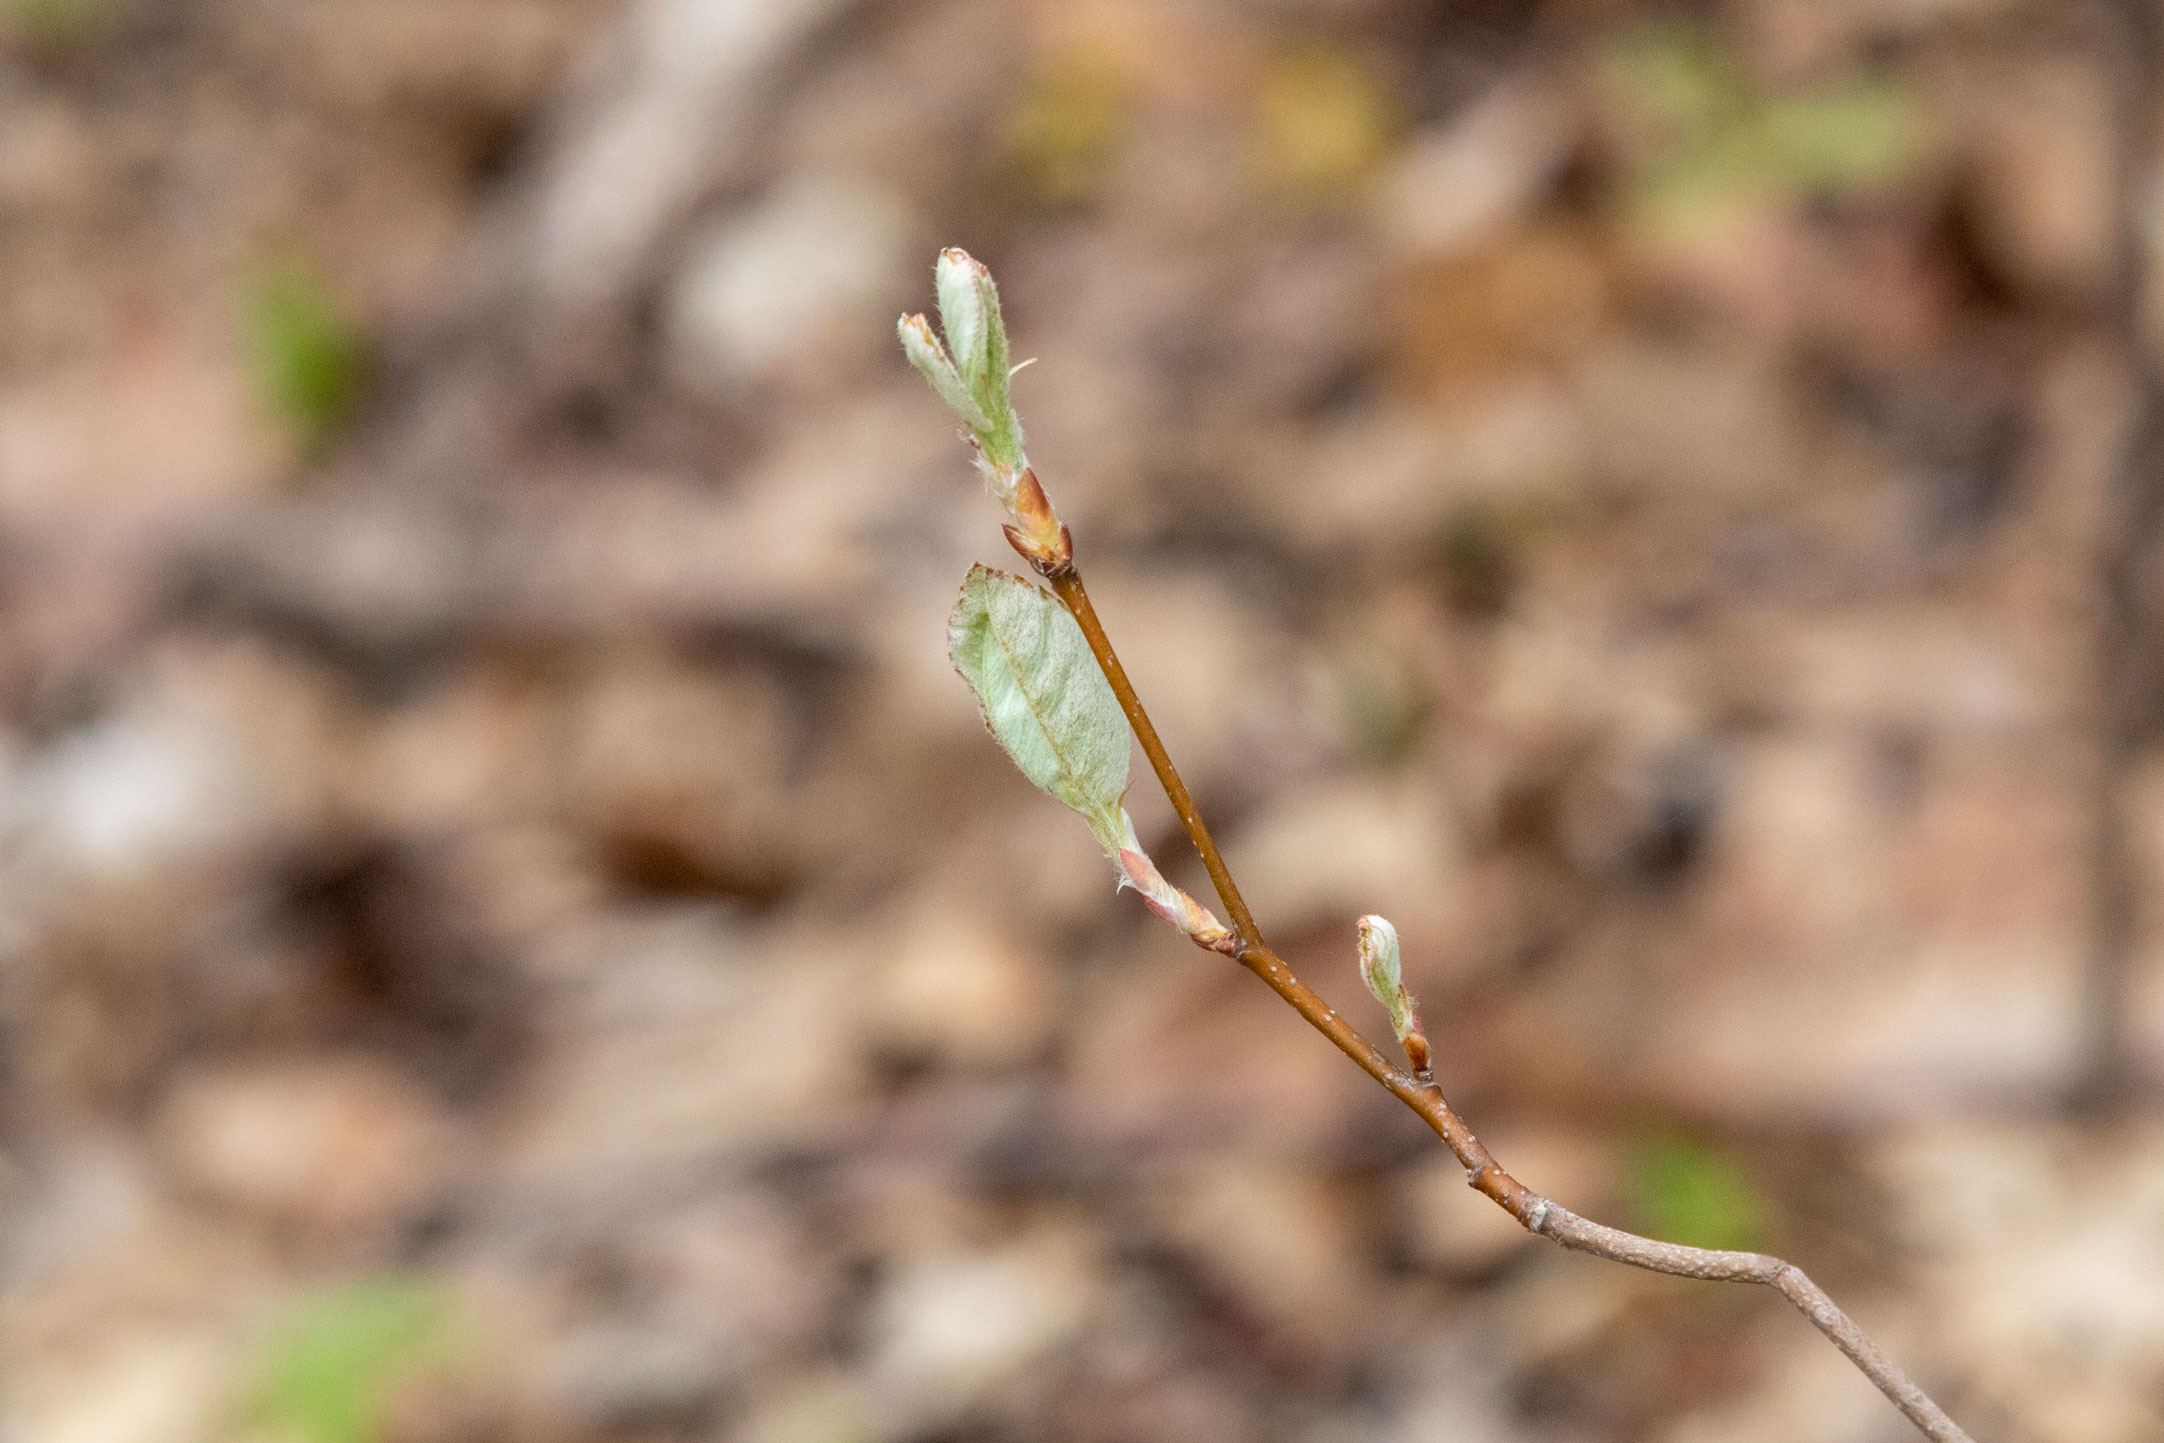 Very small leaves on a very small branch